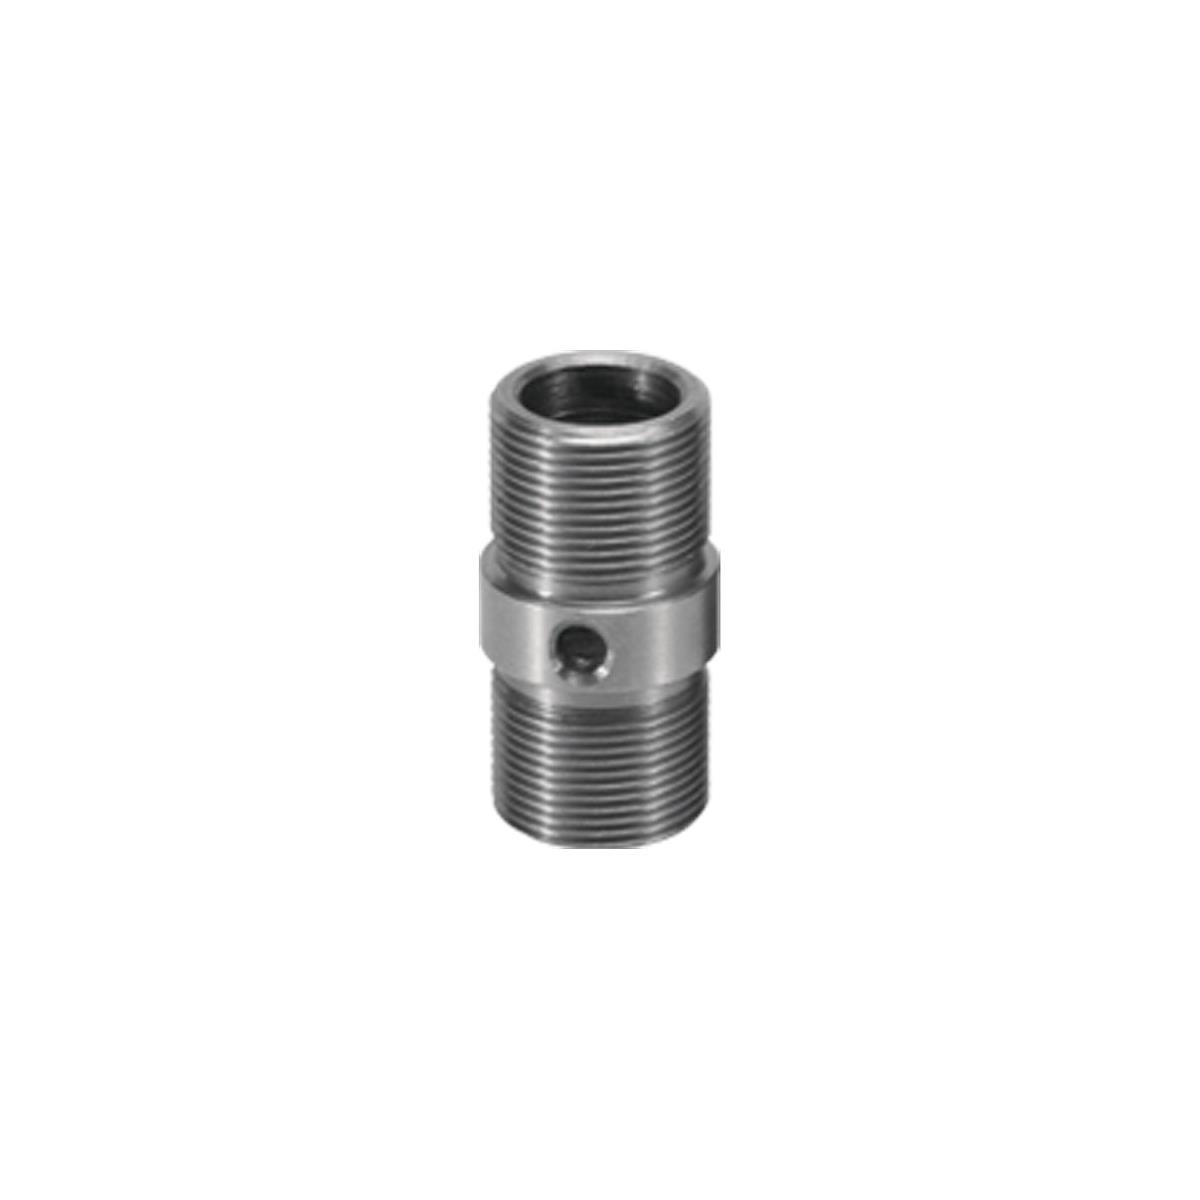 Image of Tilta Rod Connection Screw for 19mm Stainless Steel Rod